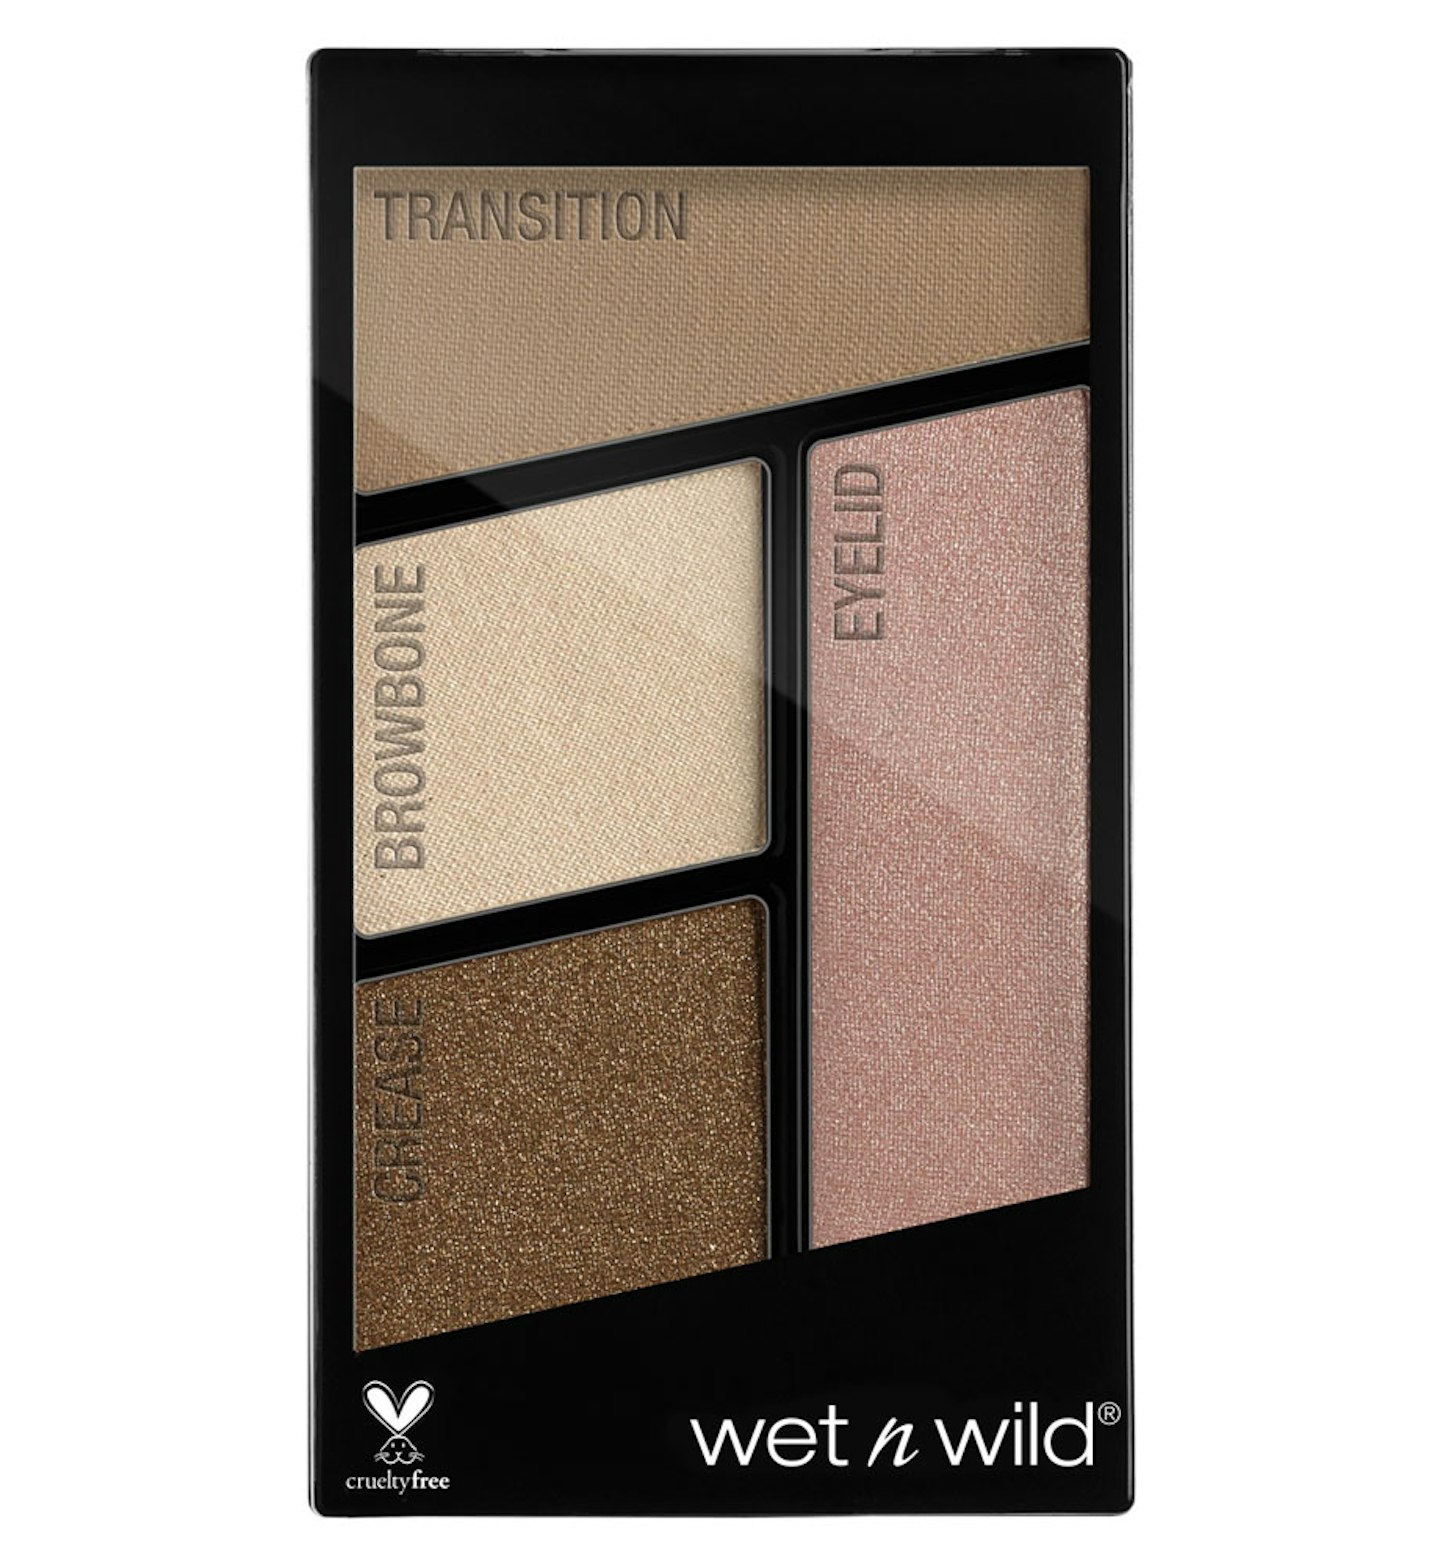 wet n wild Colour Icon Eyeshadow Quads in Walking On Eggshells, £3.99 from Boots